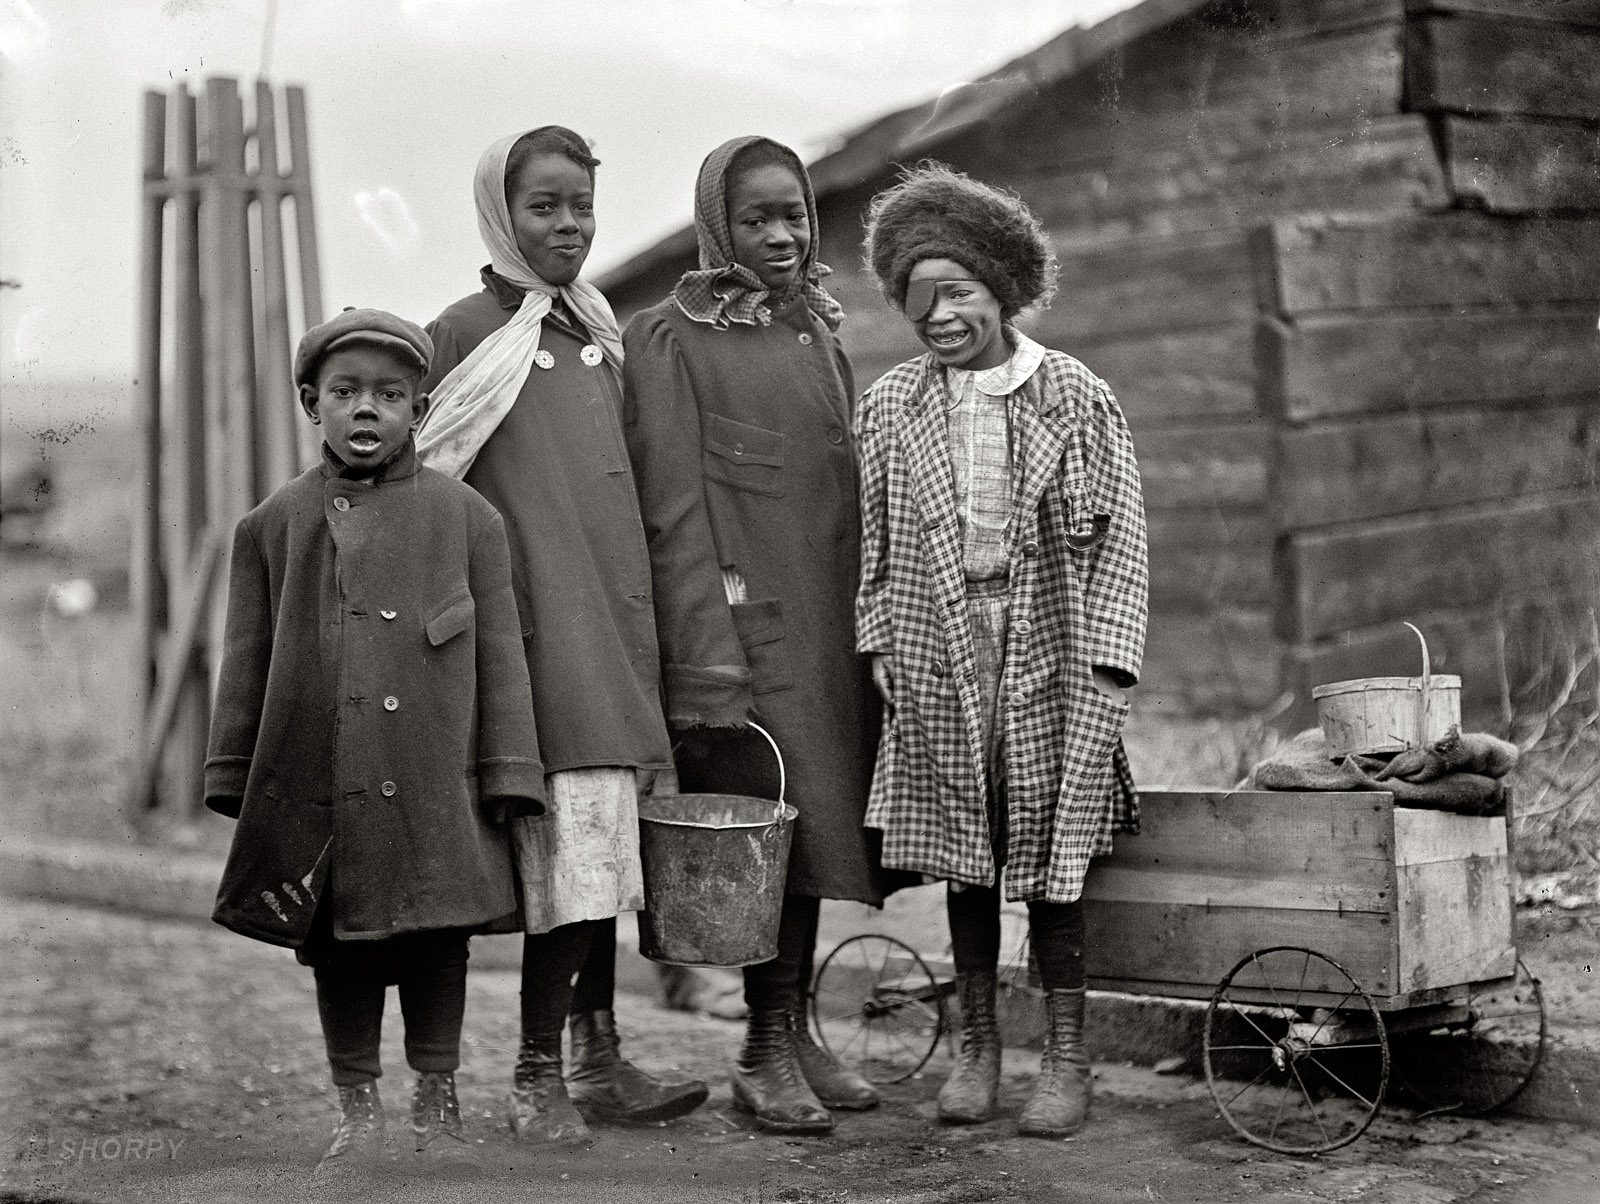 District of Columbia, 1911. "Negroes. Negro life in Washington." Harris & Ewing Collection glass negative, Library of Congress. View full size.